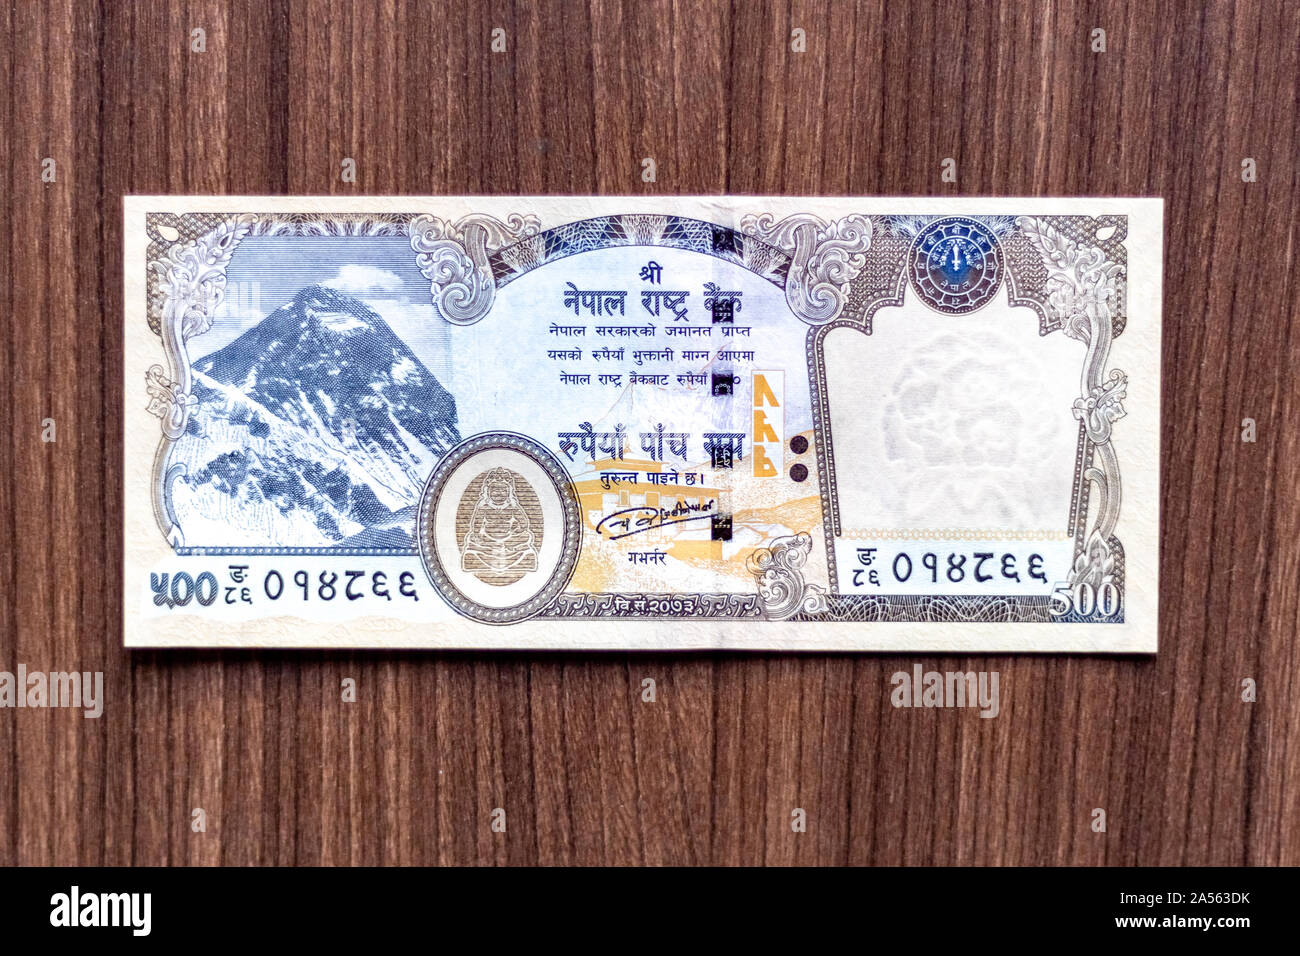 Nepali bank note or Nepali currency of Rupees 500 denomination with sketch of Mount Everest top down view Stock Photo